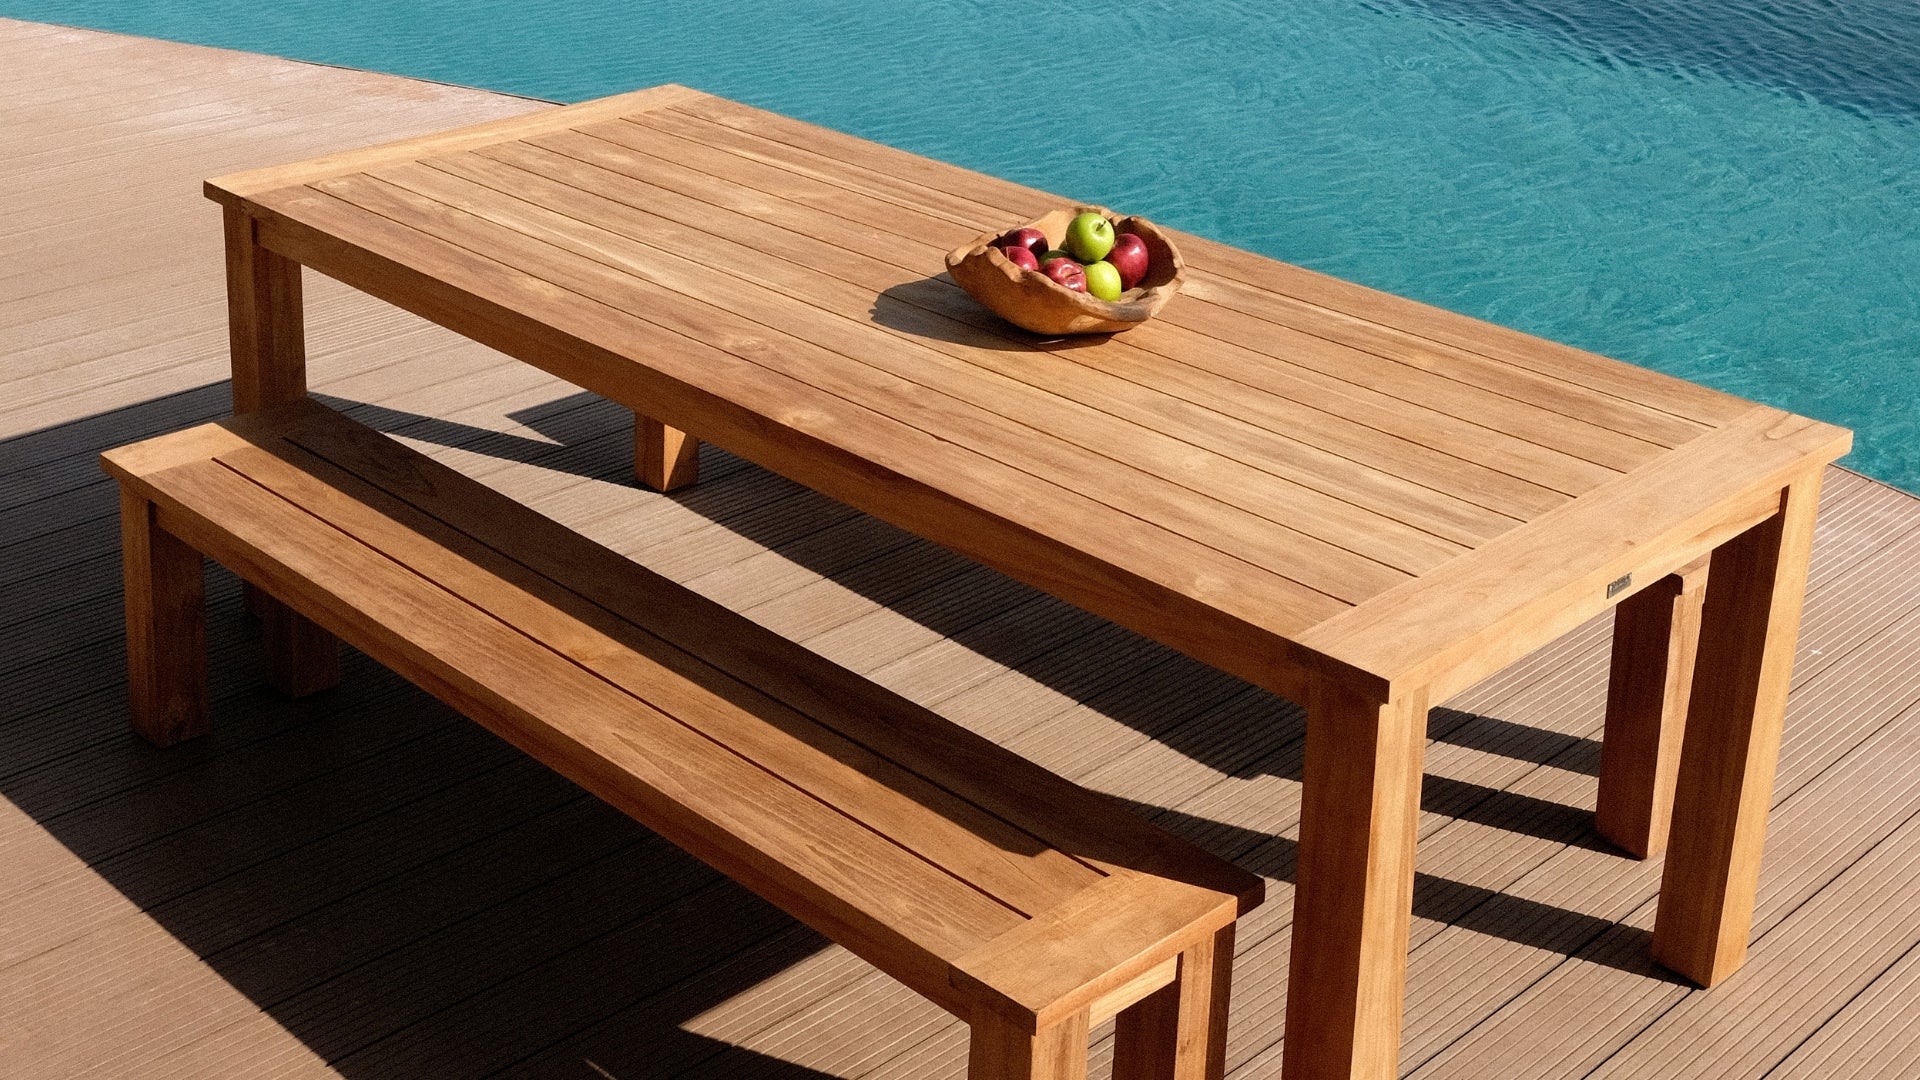 Which Materials are Best for Outdoor Furniture?